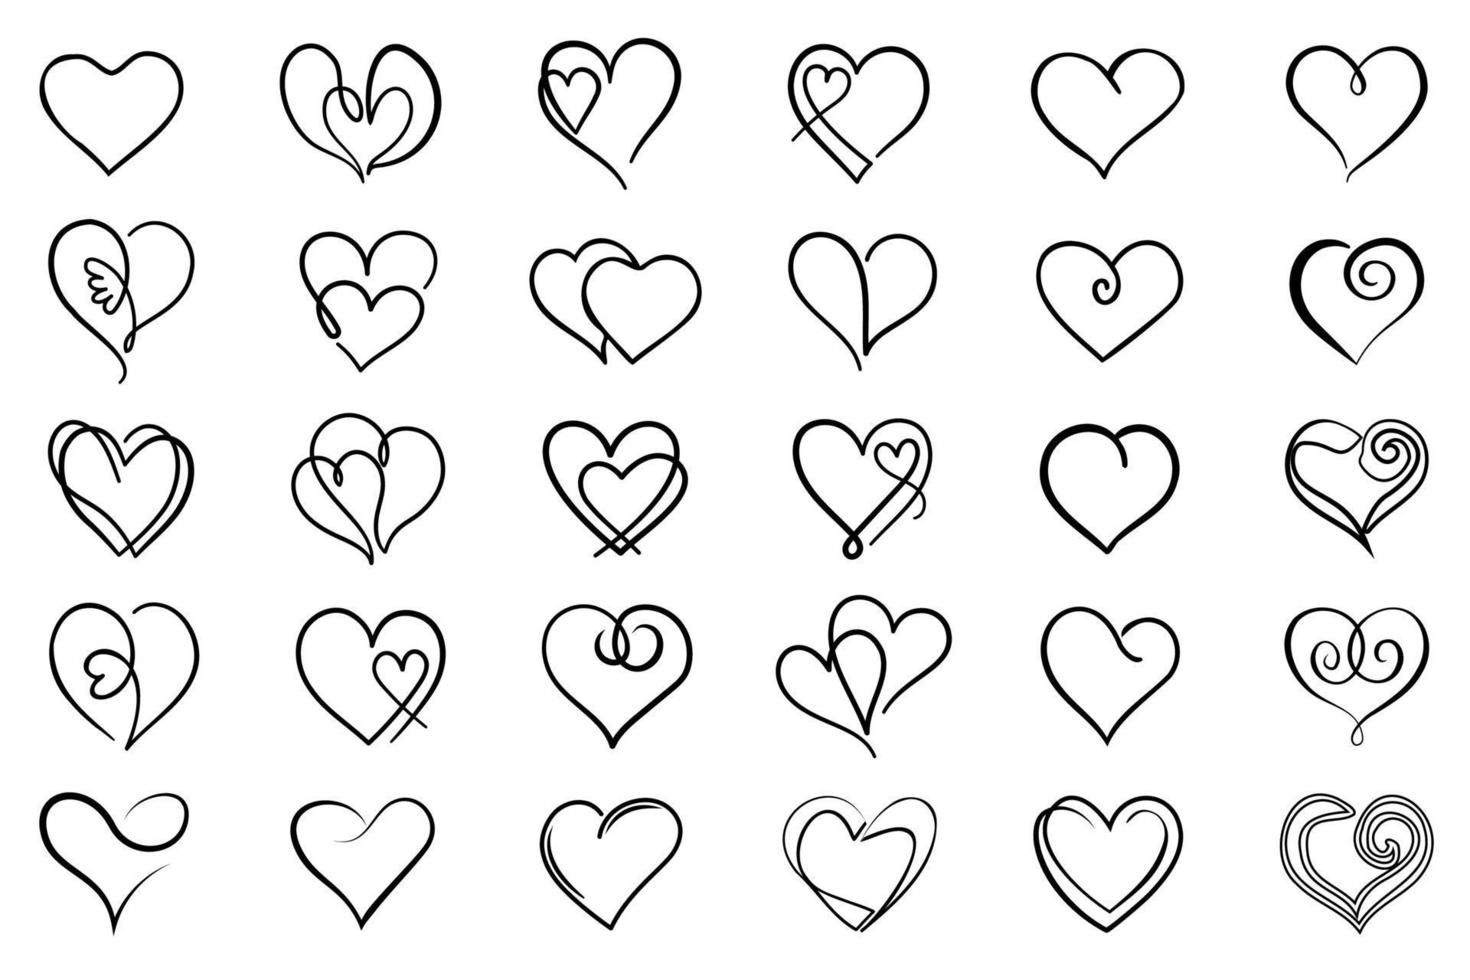 Outline hearts set. Black outline heart silhouettes collection. Line art hearts illustration. vector